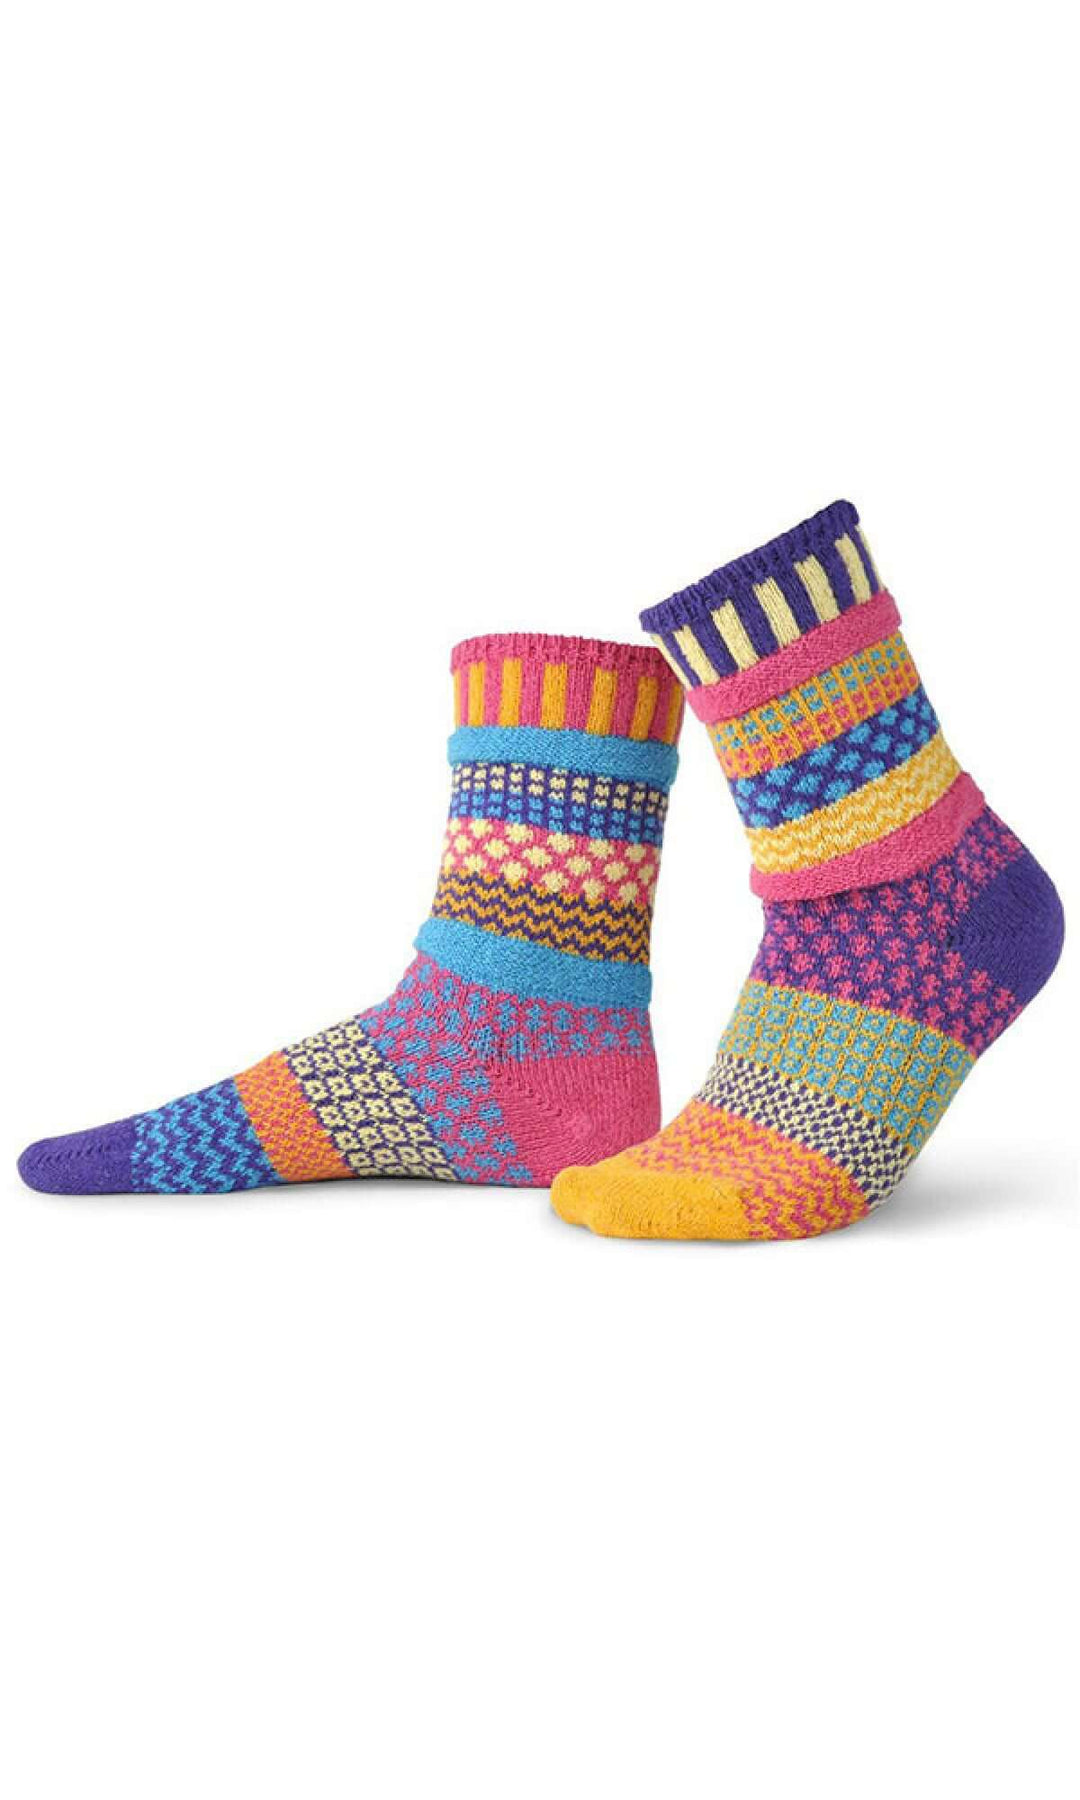 SUNNY Knitted Crew Socks Made in USA